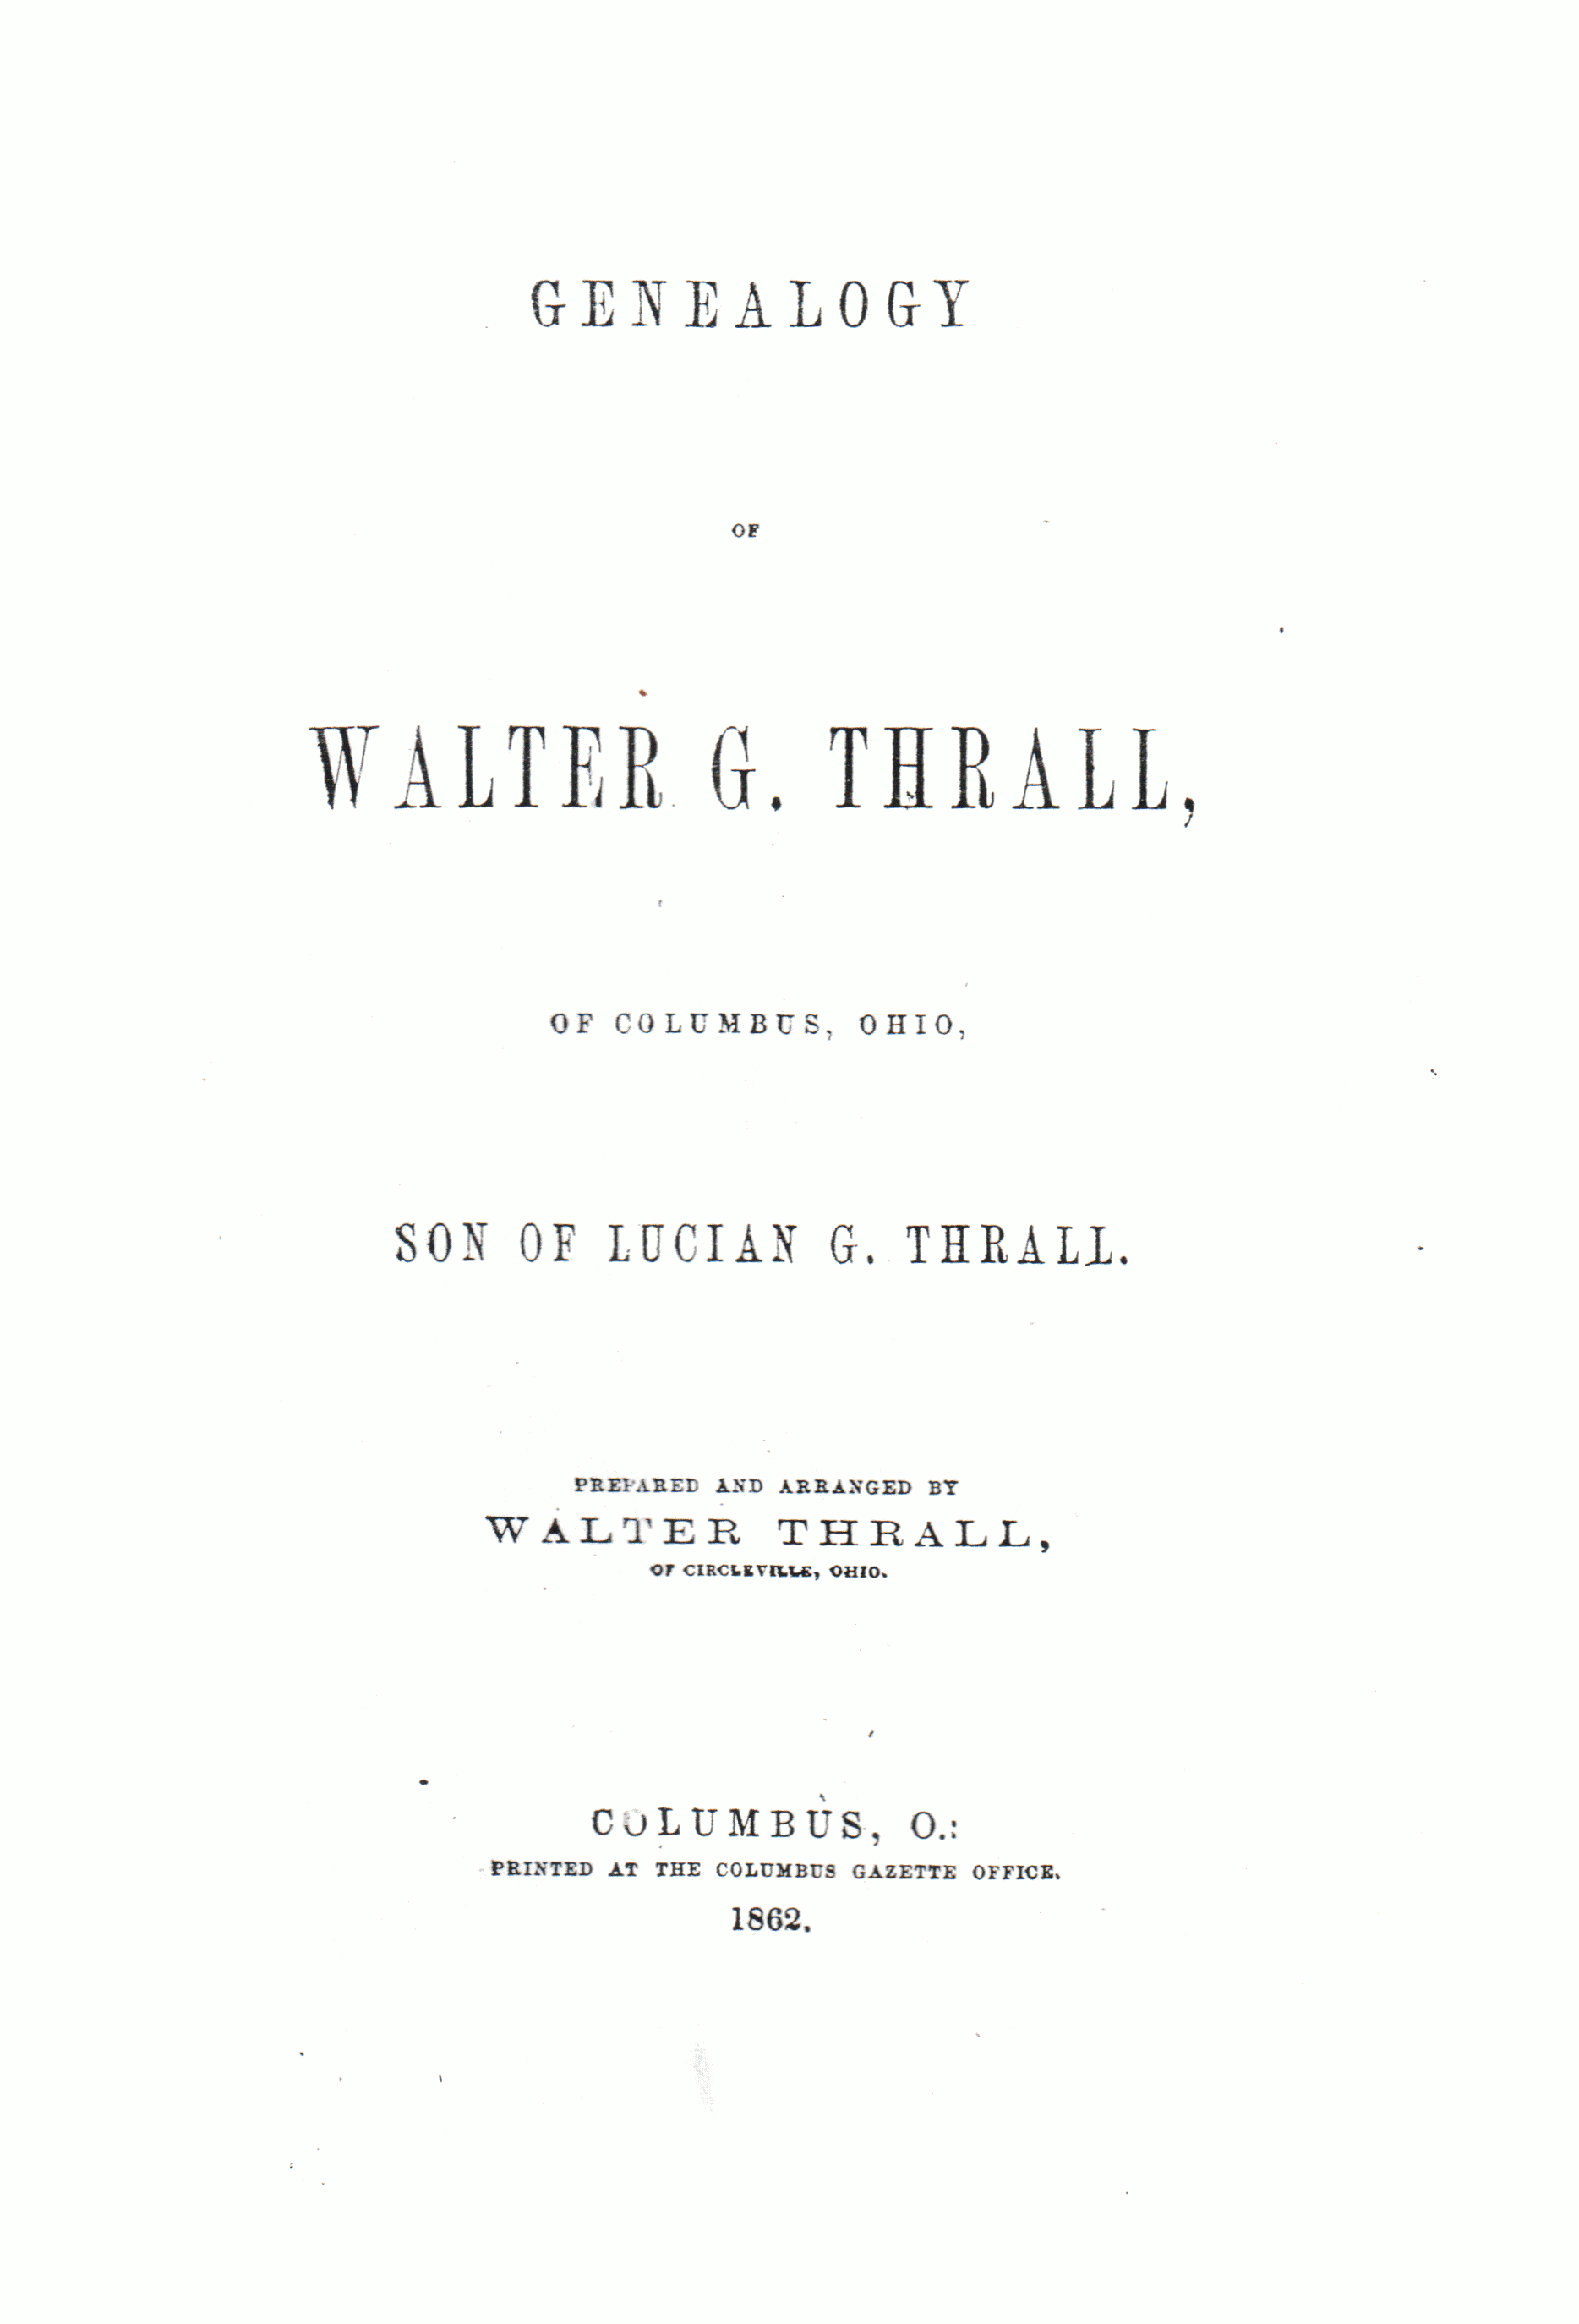 Publication - Genealogy of Walter G Thrall (cover page)